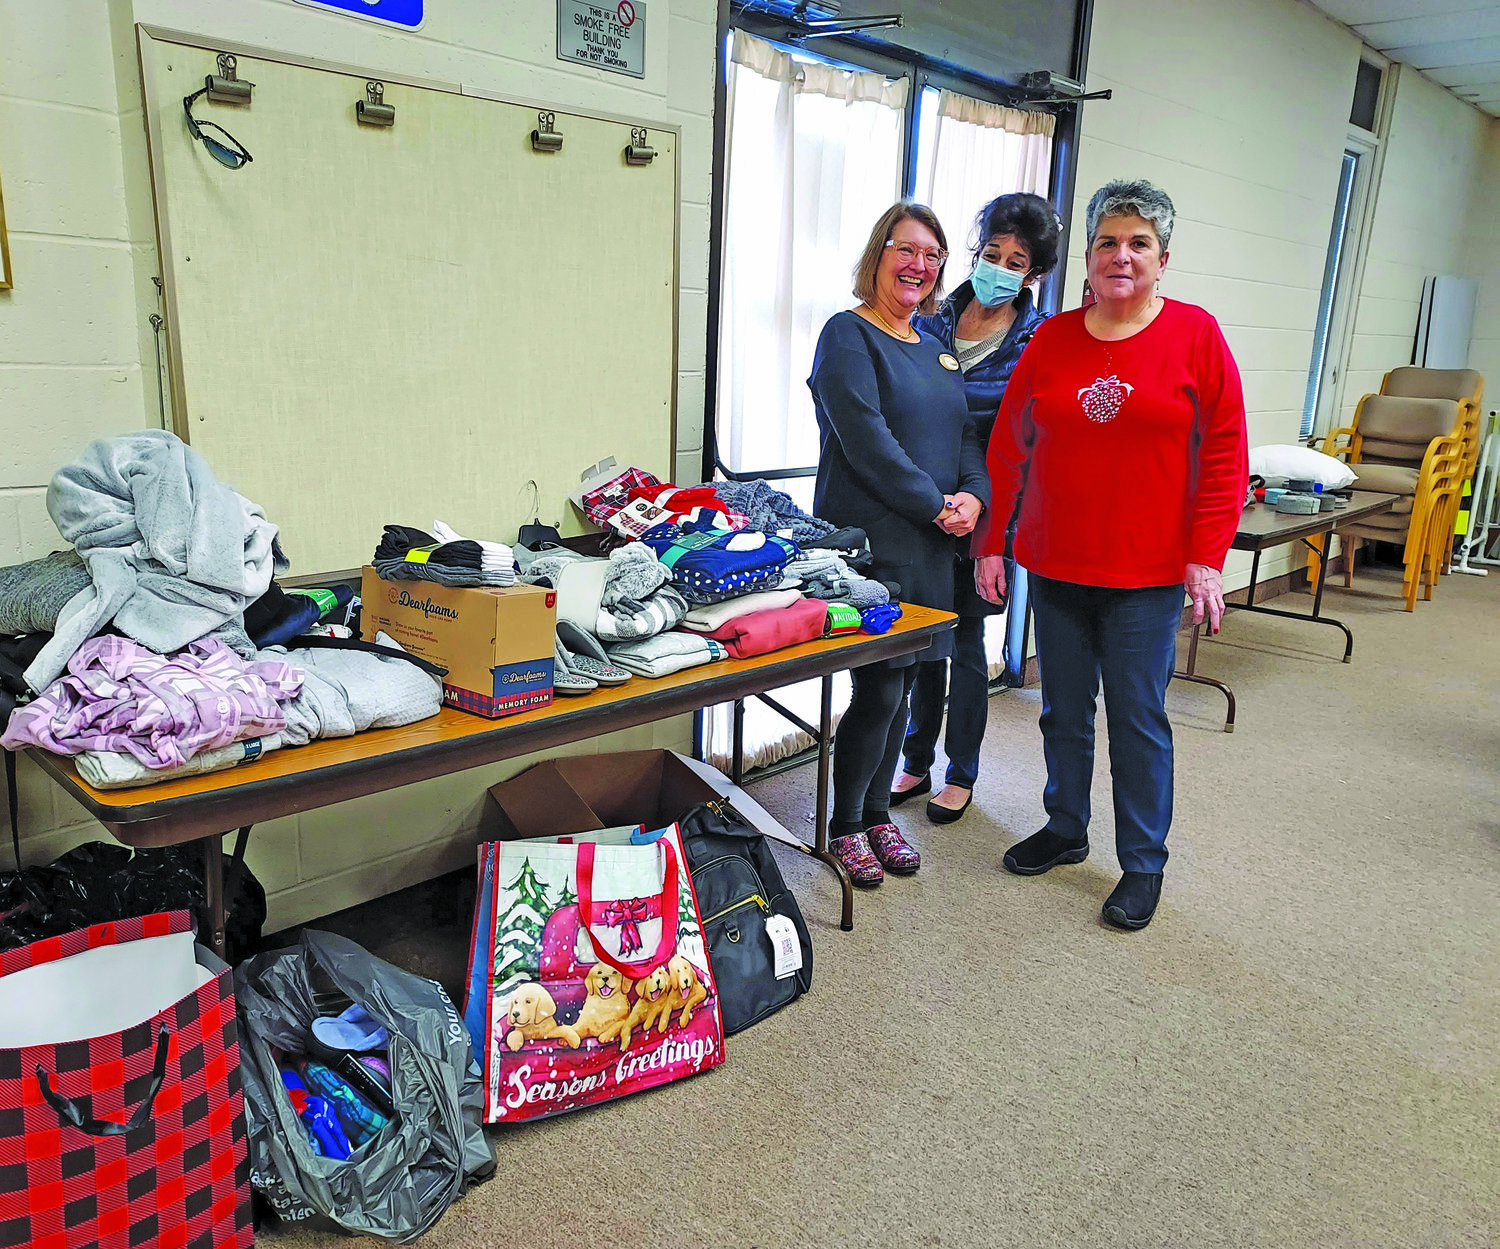 With donated items are, from left, Robin Nissenfeld, HCRAG co-president; Sandra DeSapio, Consignment Shop of Flemington for Victims of Domestic Violence; and Lisa Savino, HCRAG co-president.